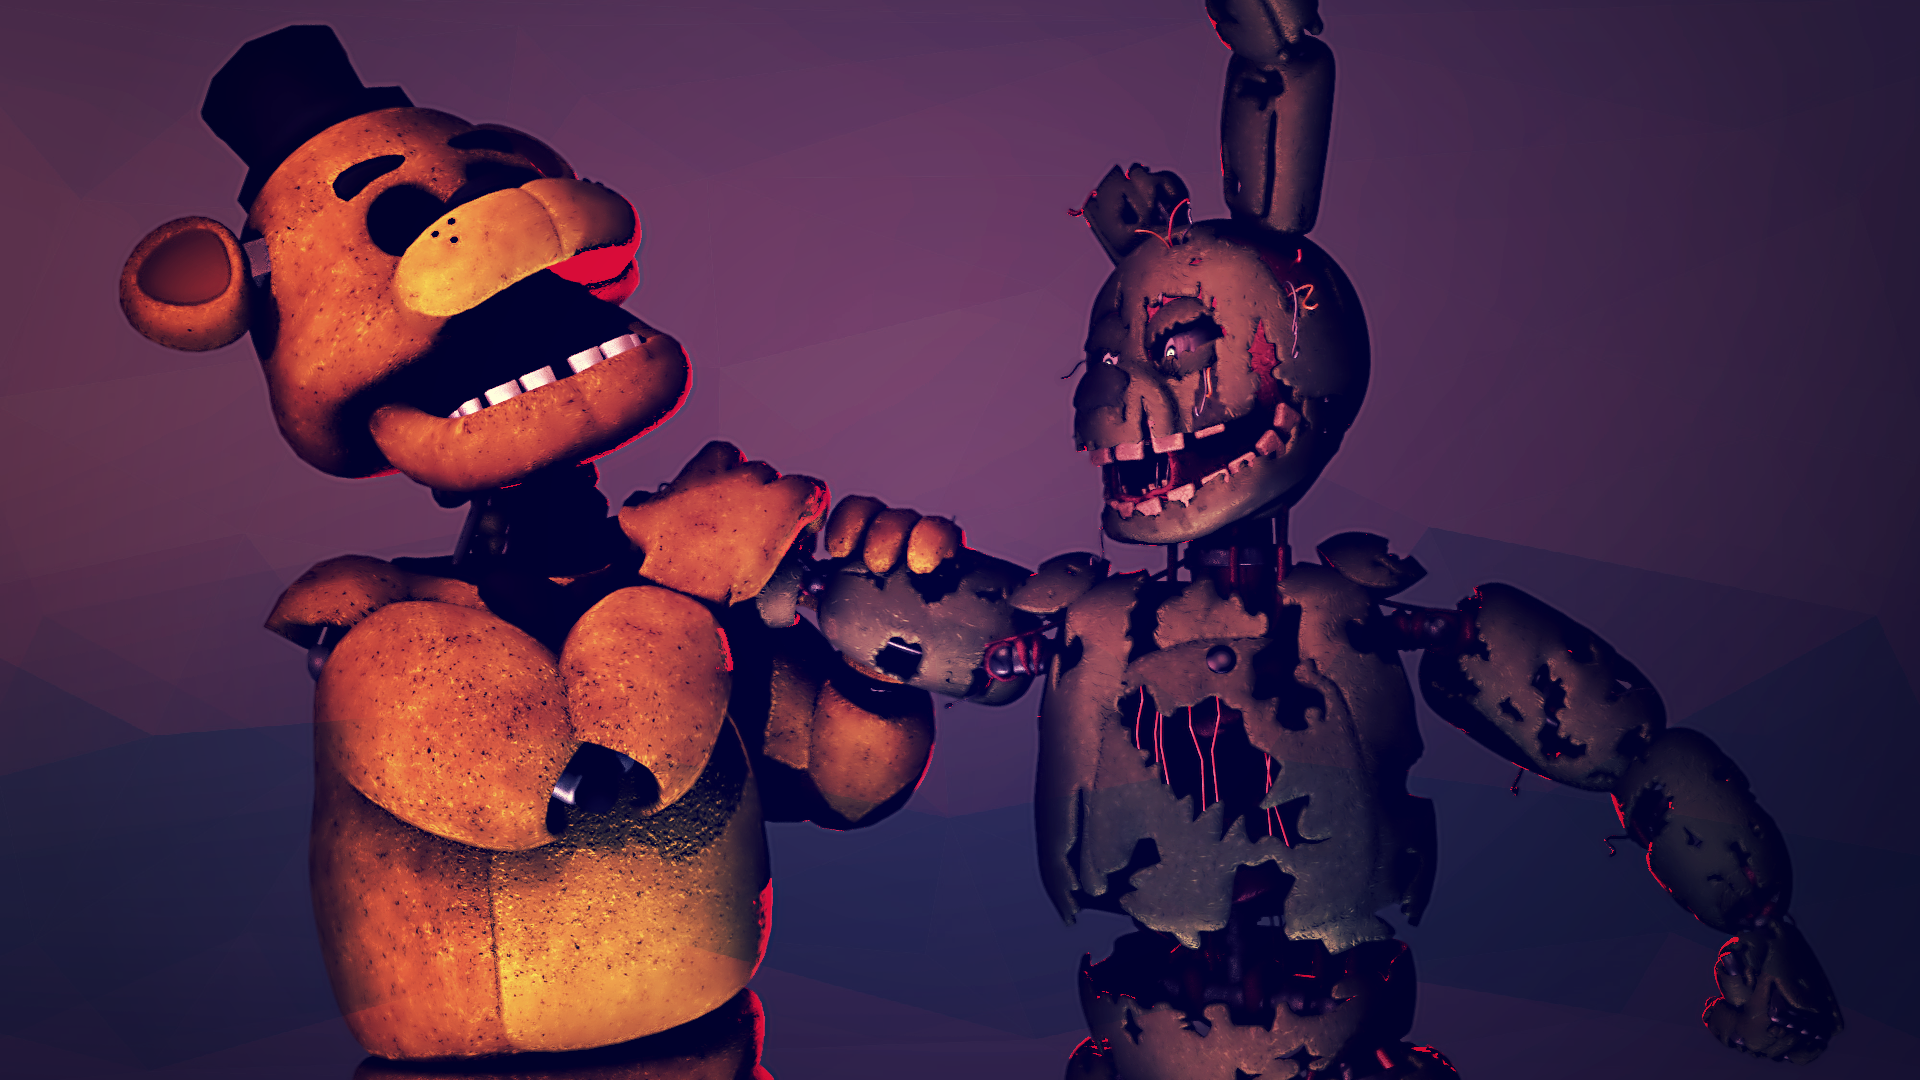 free download download golden freddy and springtrap on on springtrap x golden freddy wallpapers